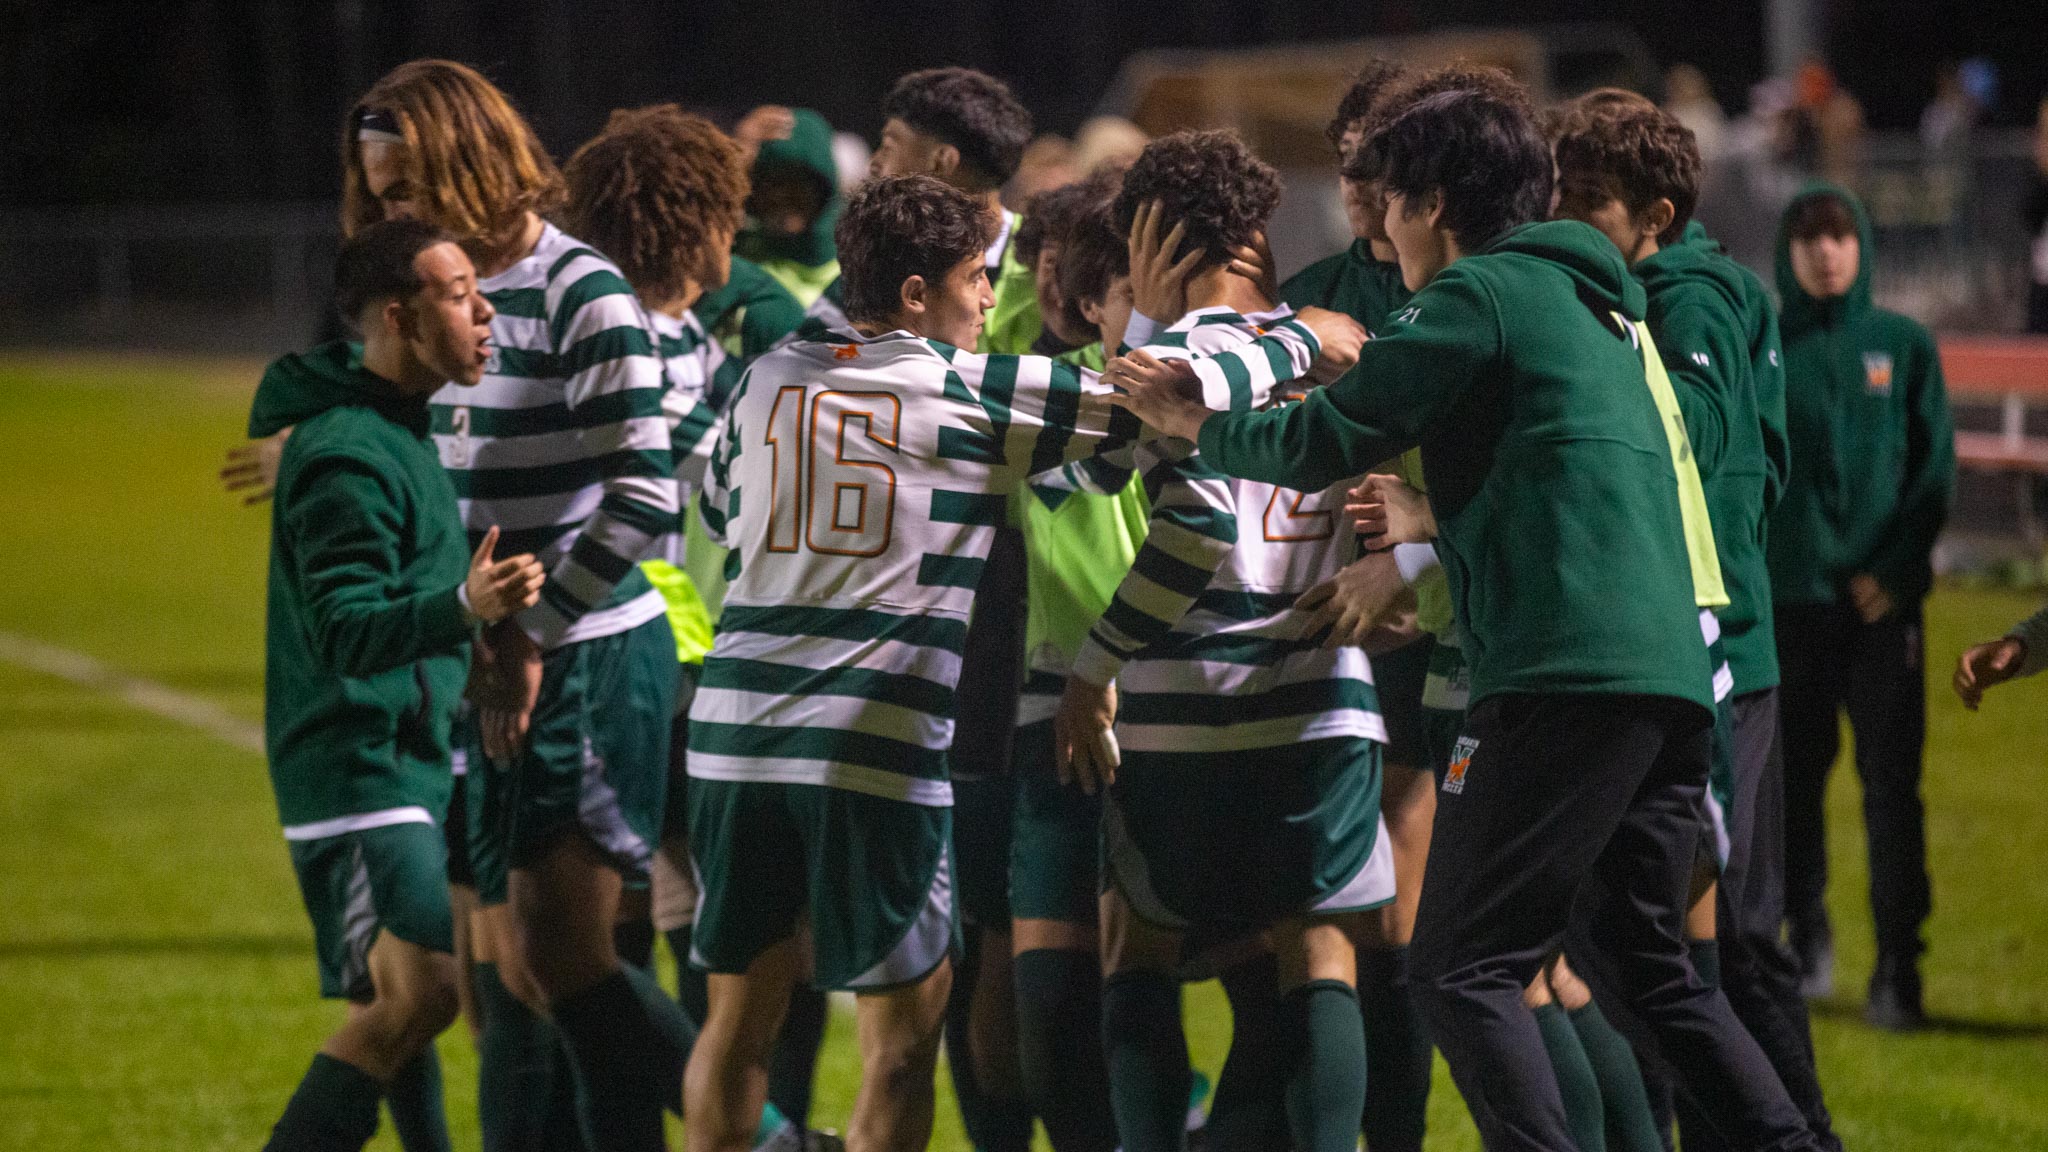 Featured image for “PHOTO ESSAY | Like Jax, unbeaten Mandarin soccer team is a blend of cultures”